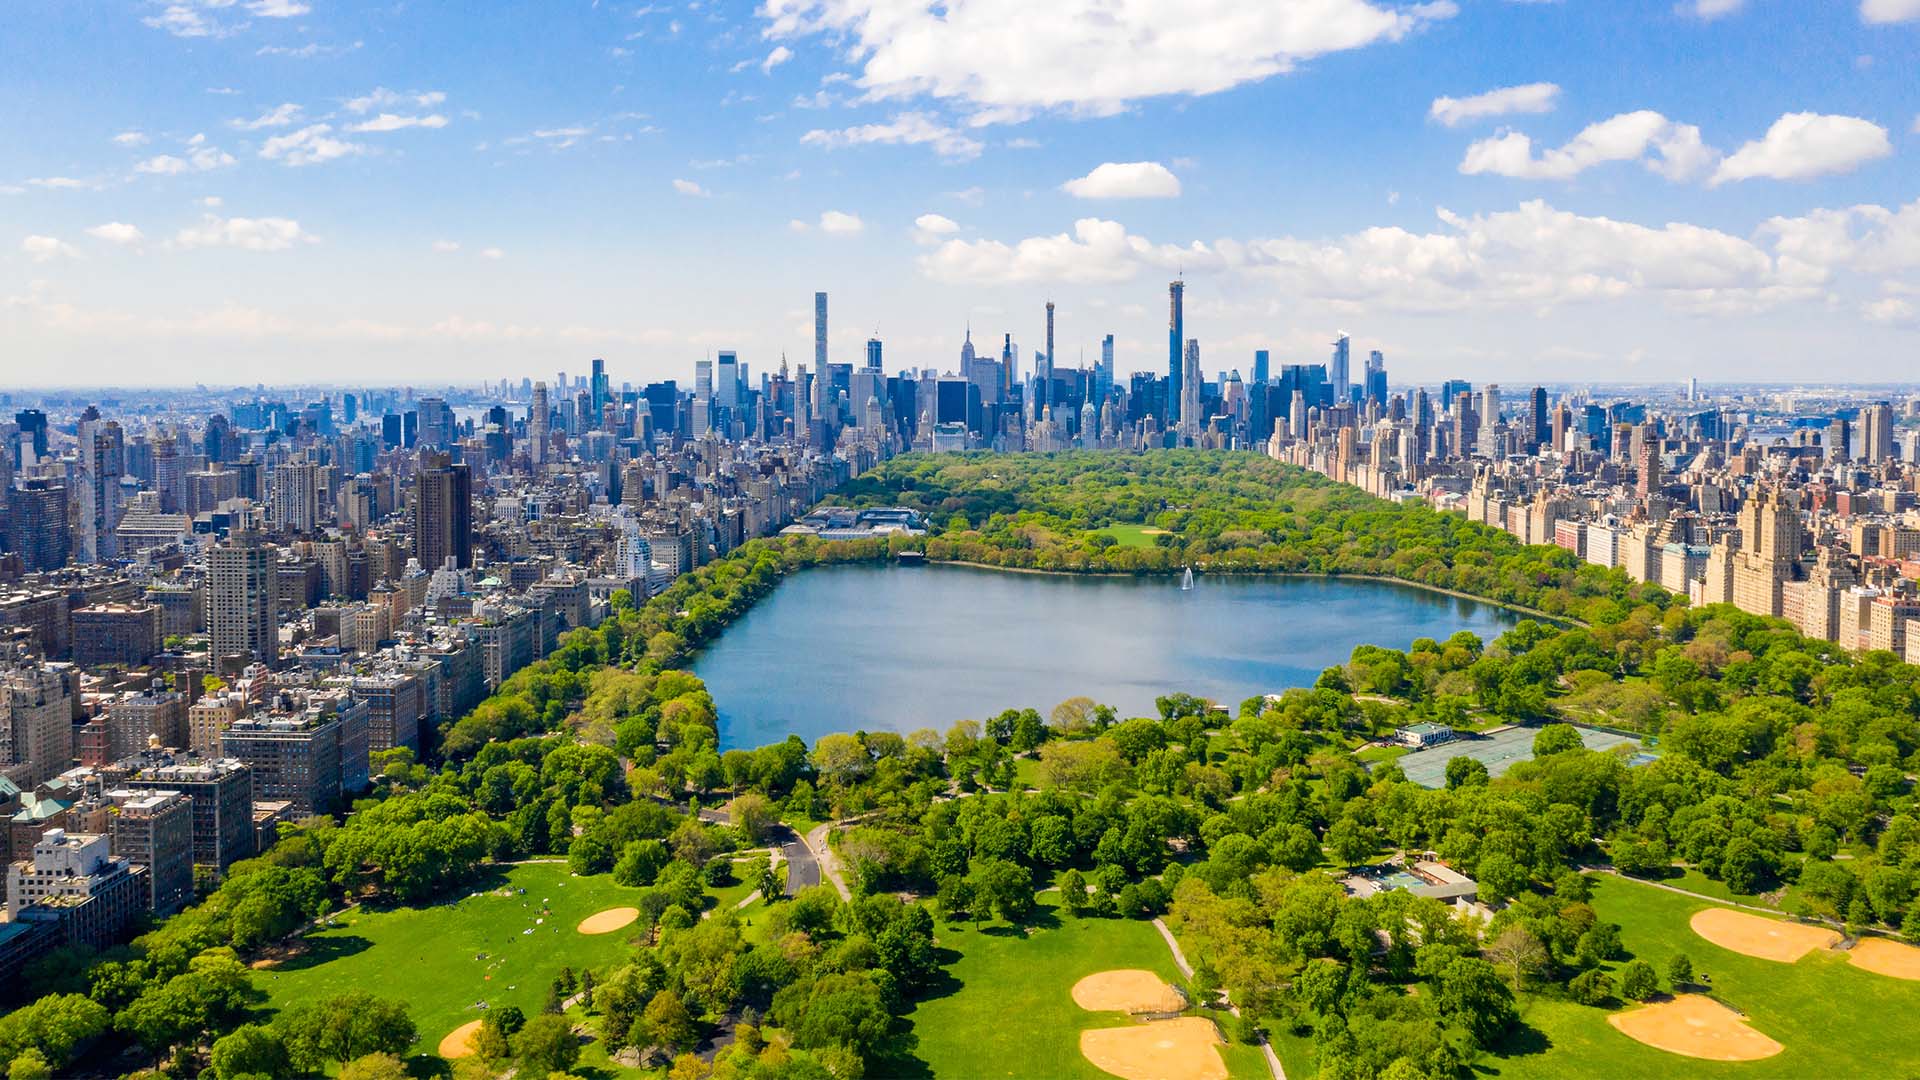 Aerial view of Central park, new york